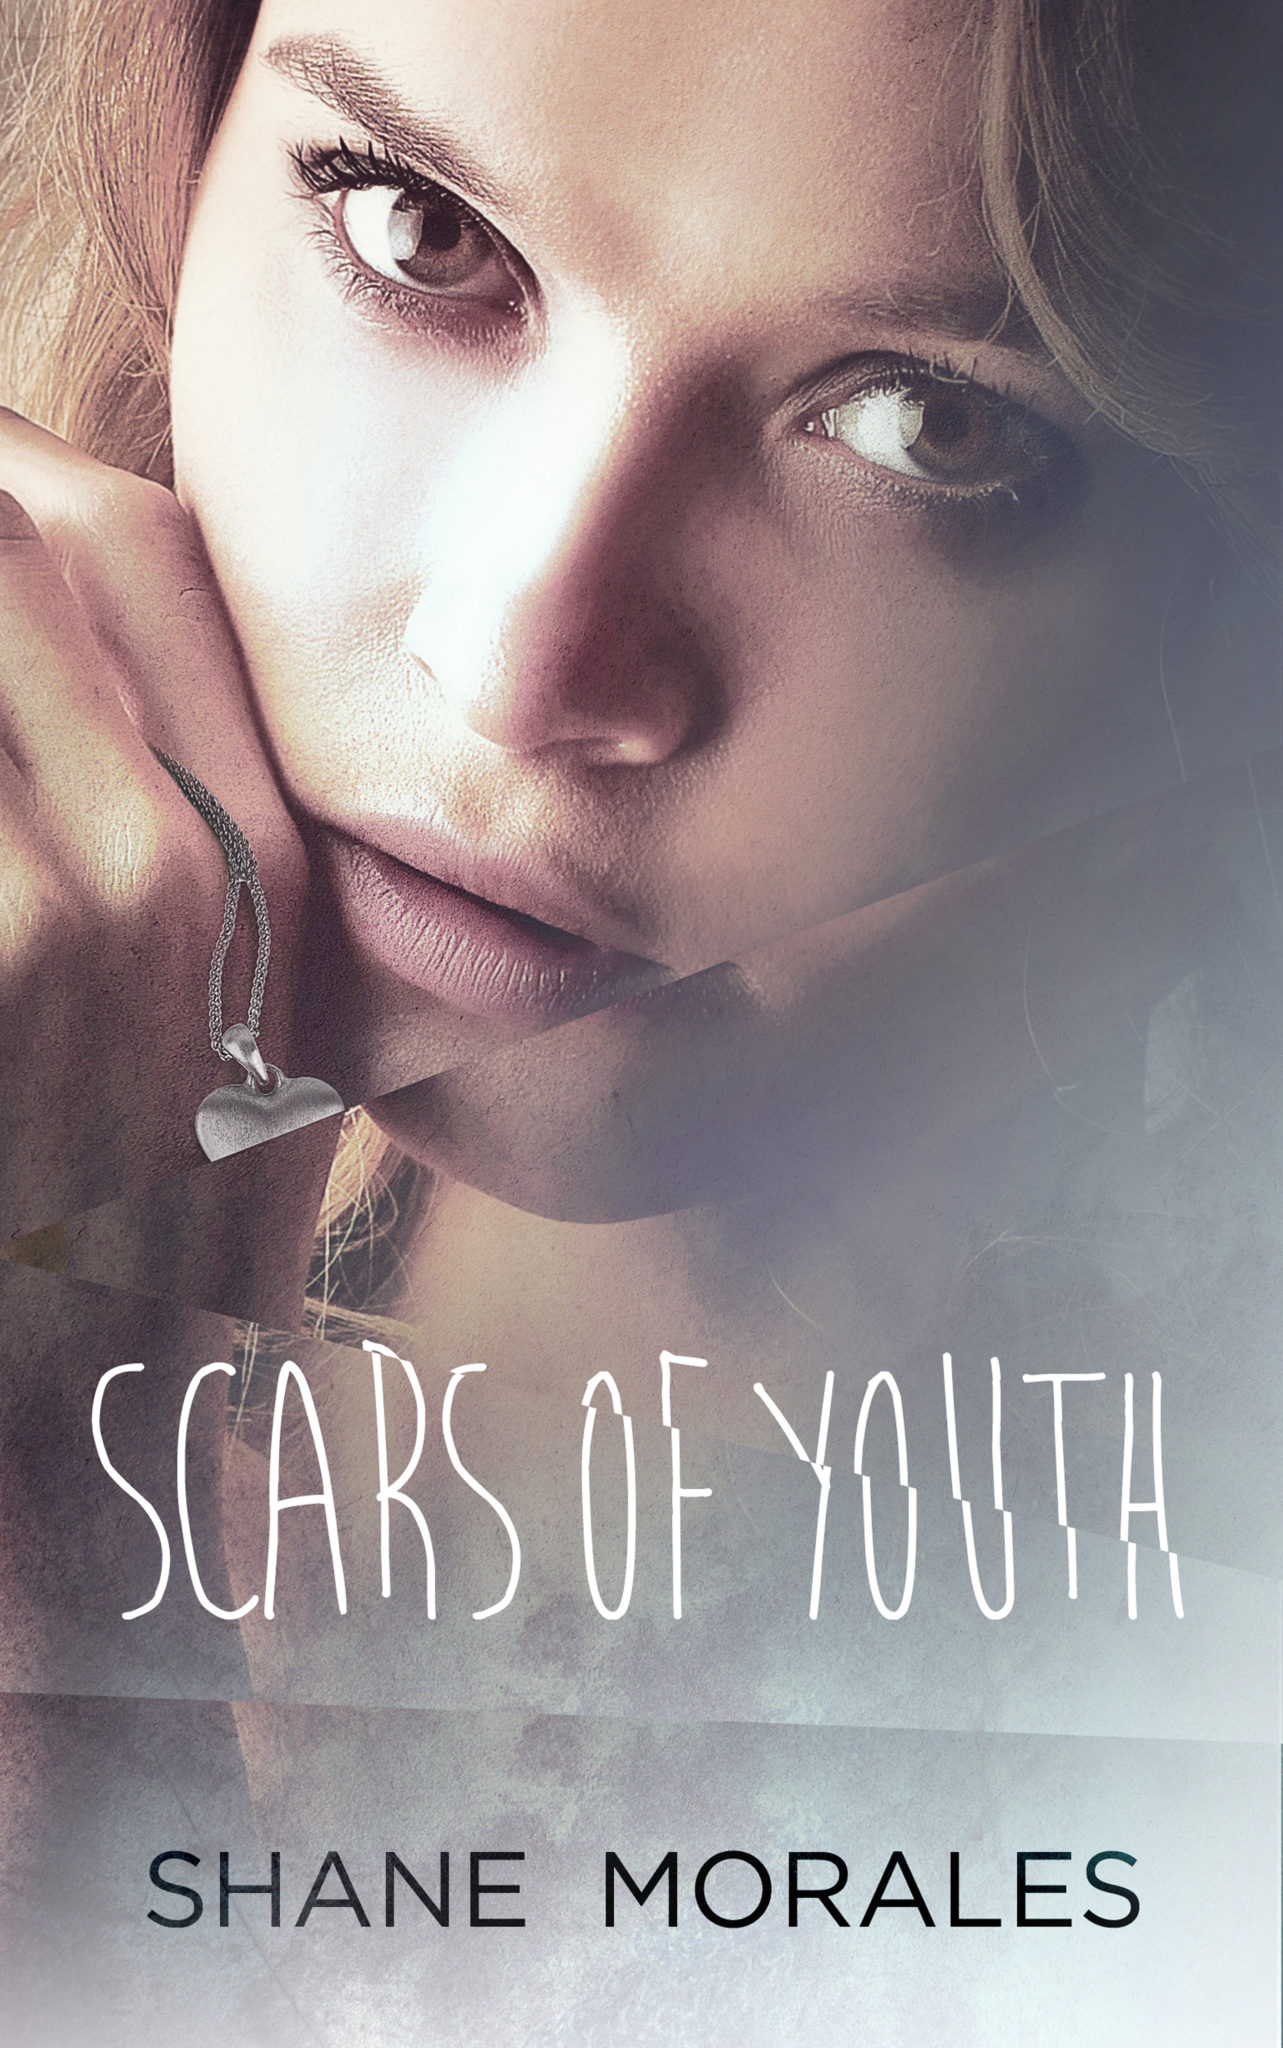 FREE: Scars of Youth by Shane Morales